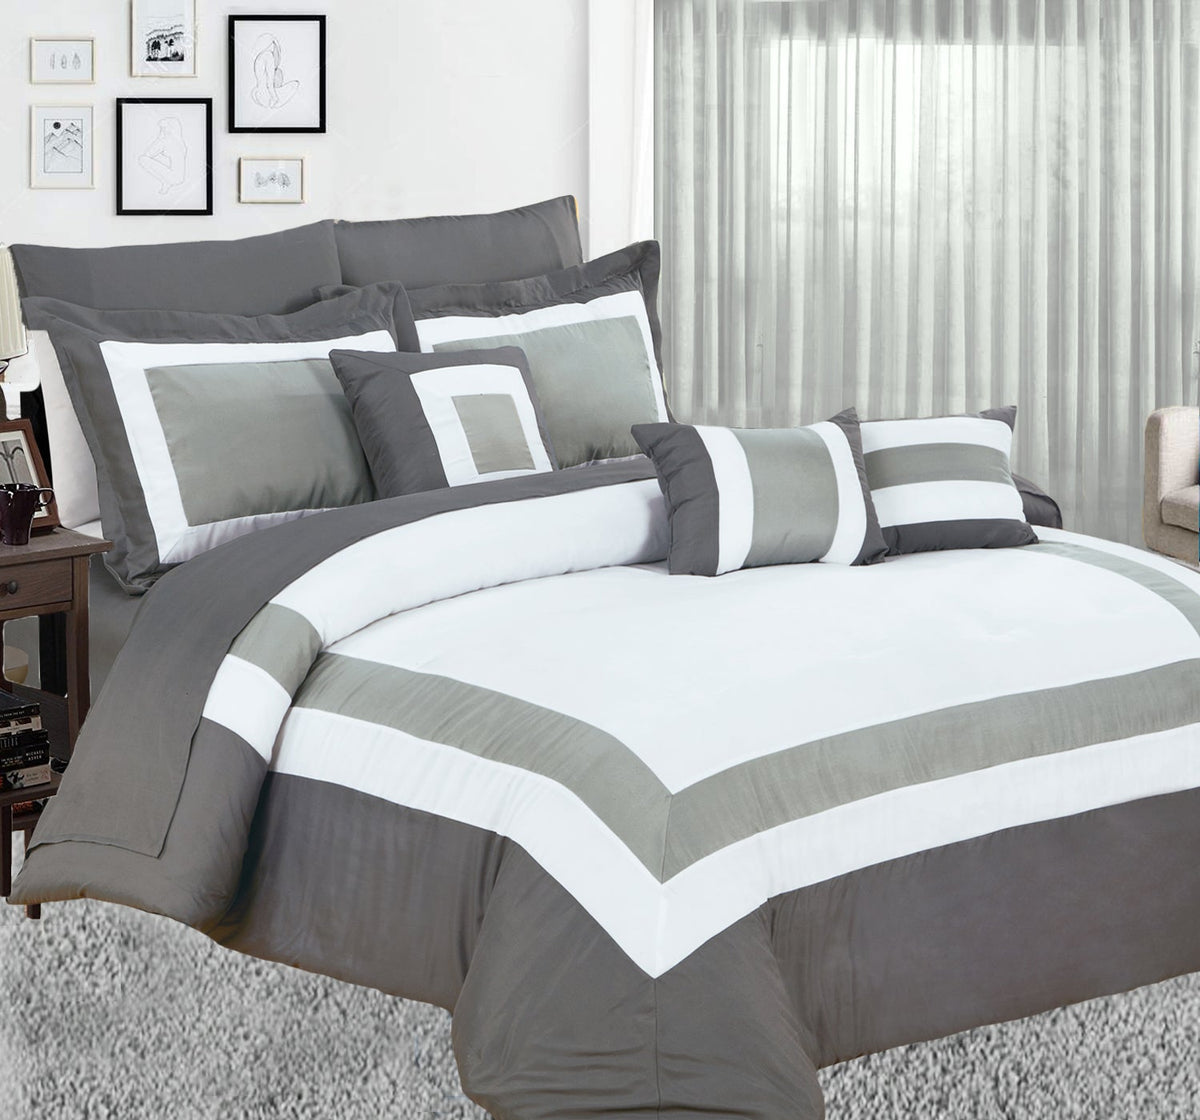 10 Pieces Comforter and Sheets Set